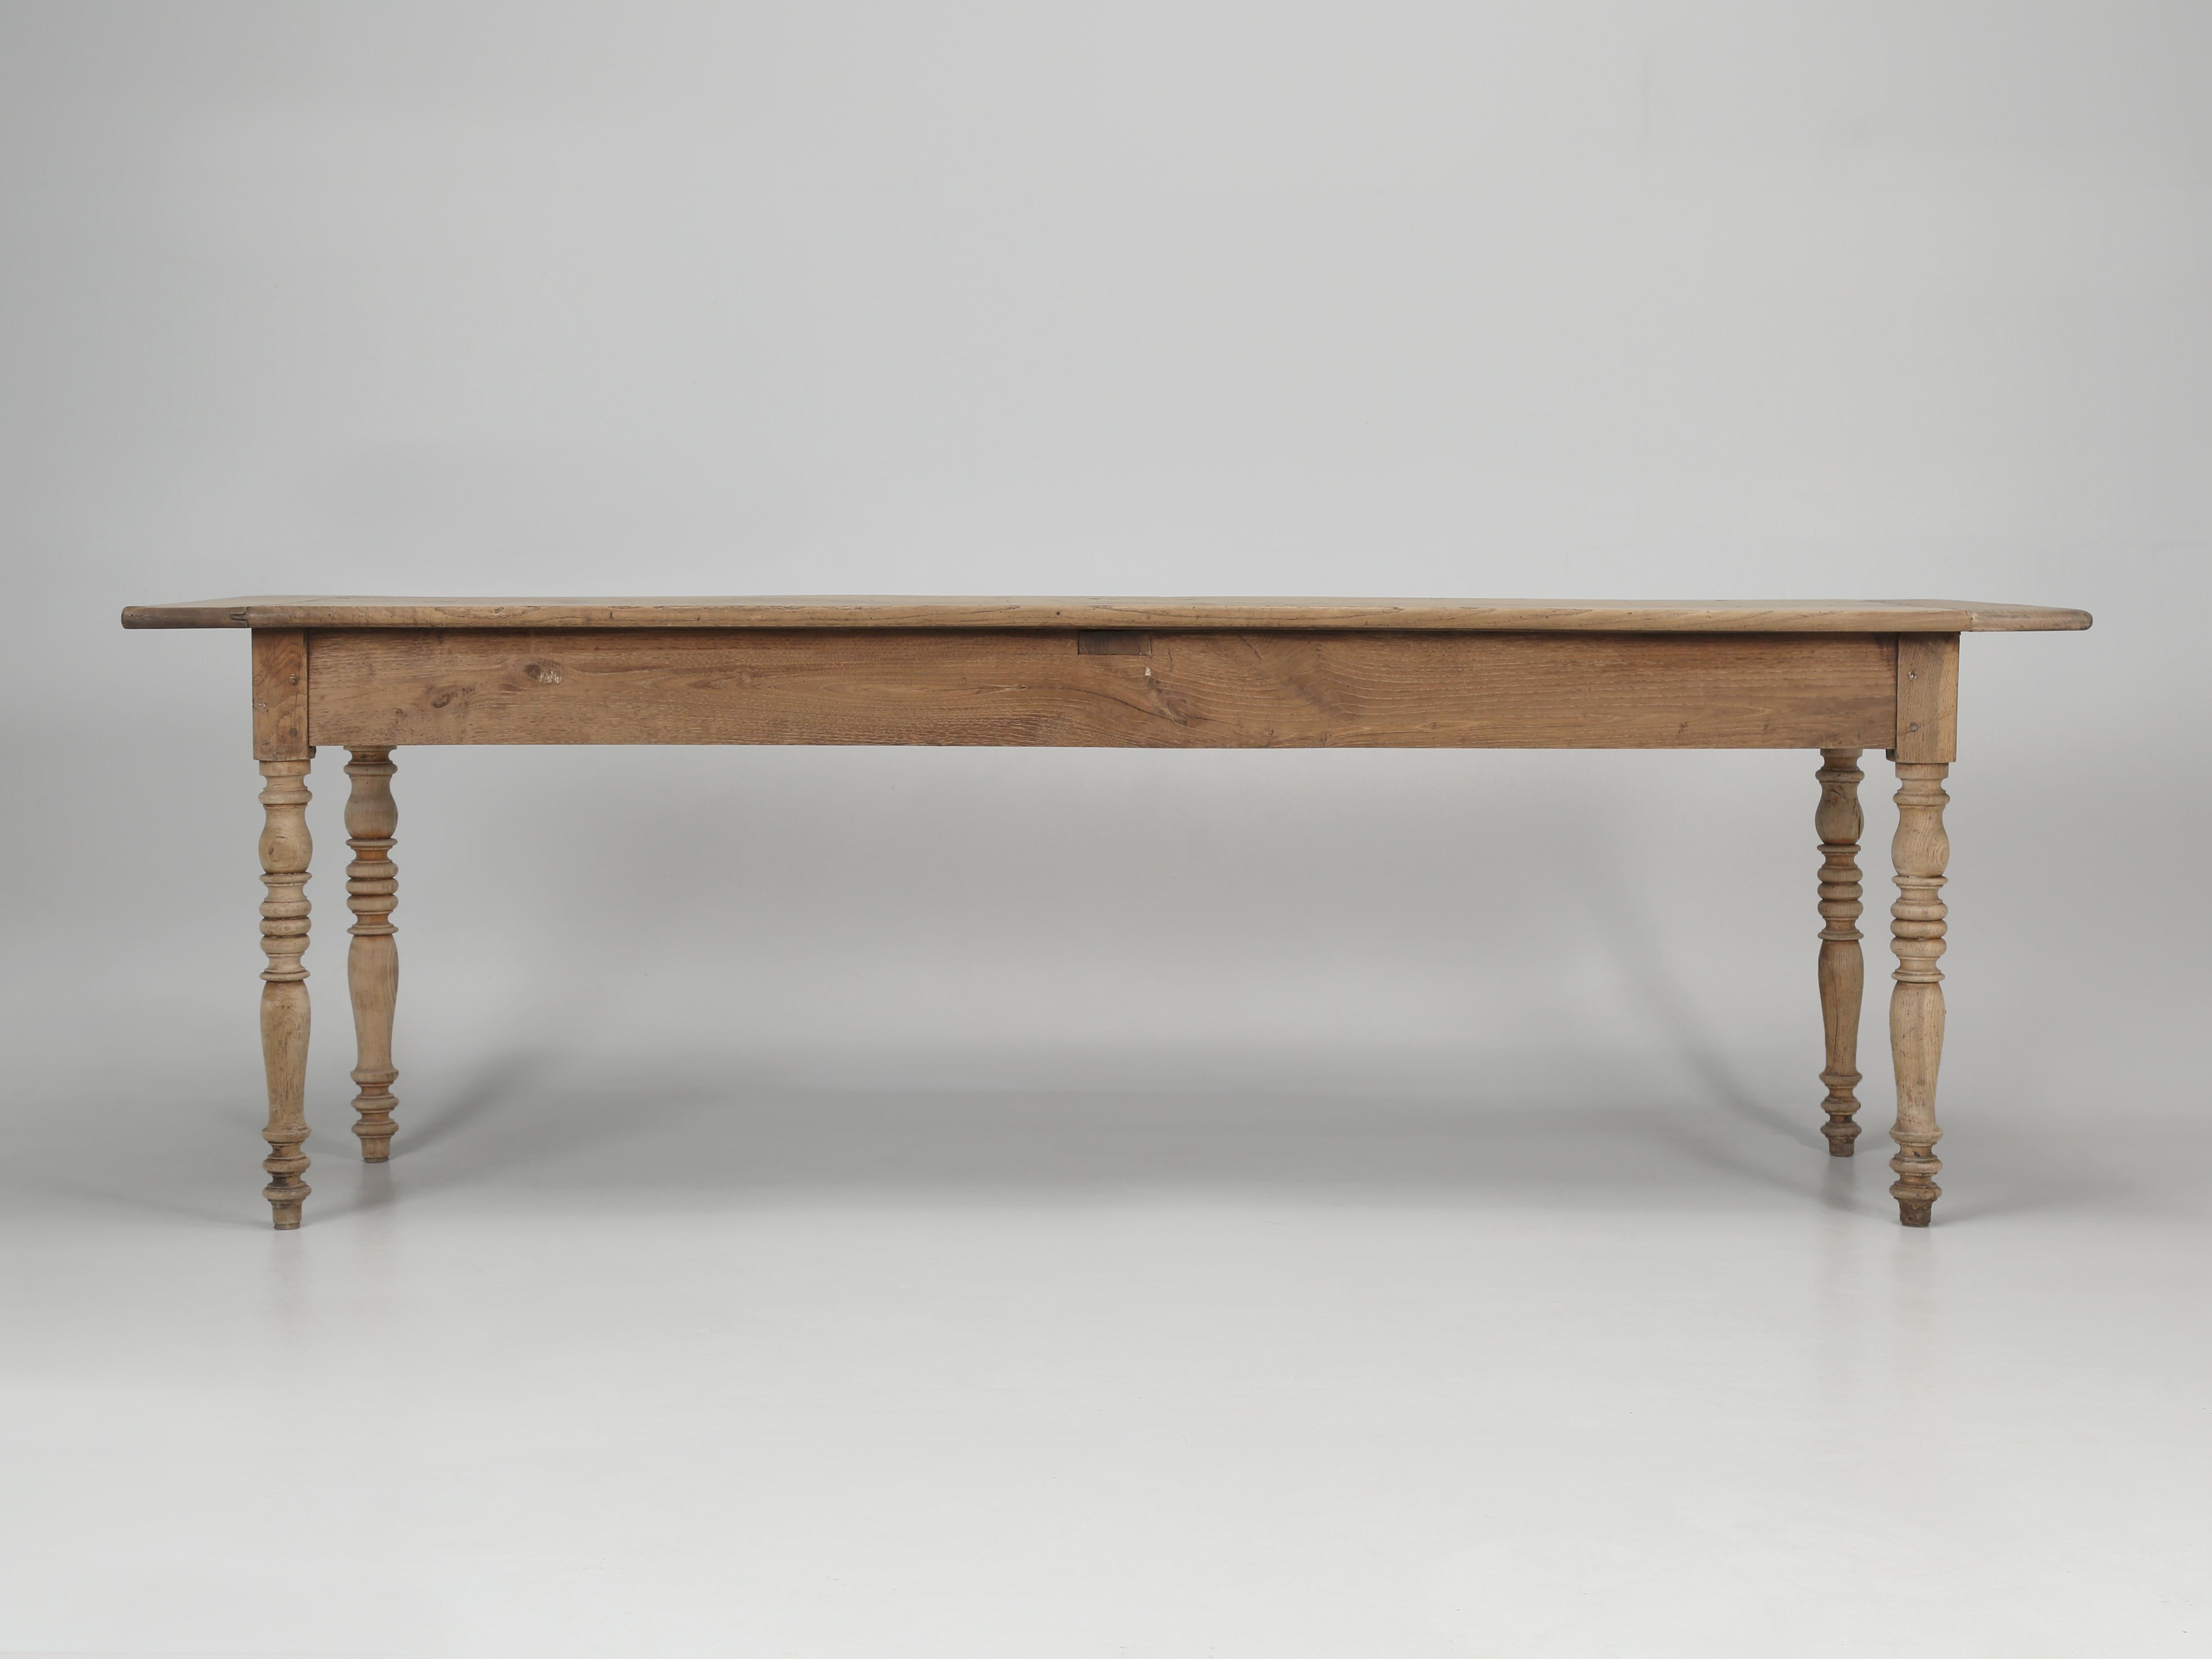 Antique French White Oak Farm Table Pegged 3-Board Top Old Plank Washed Finish 11